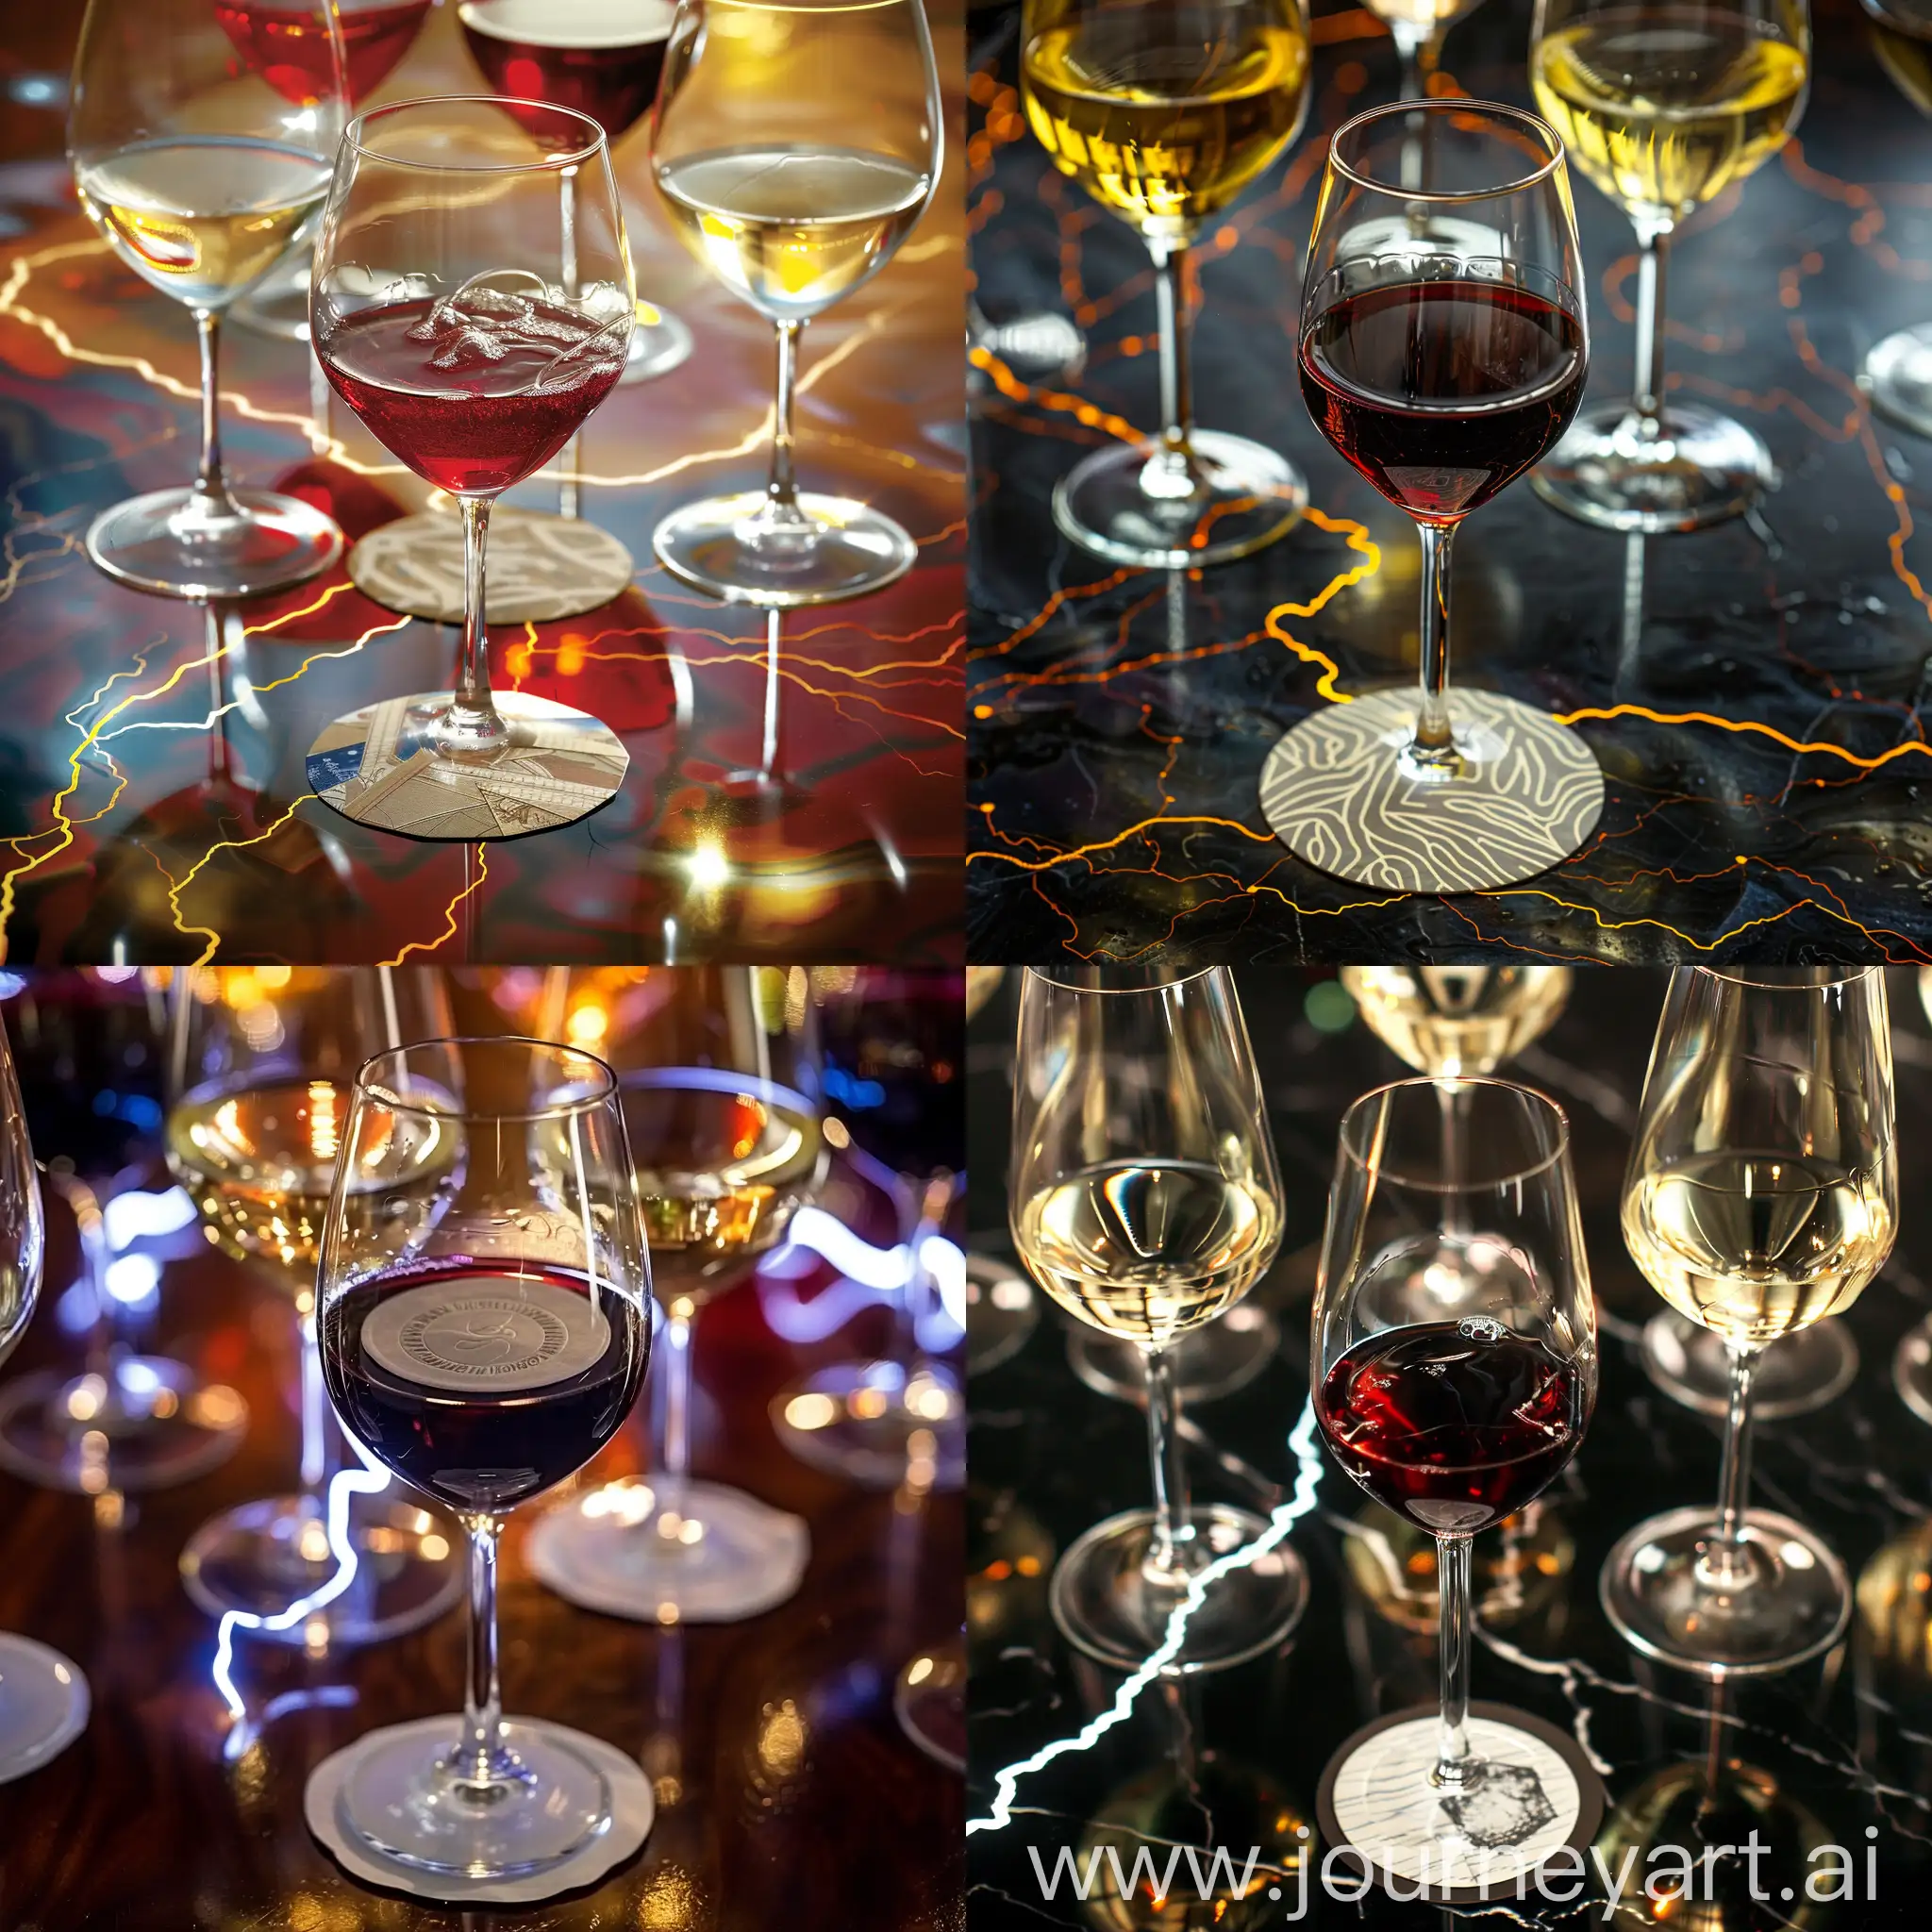 5 wine glasses on table of which one glasses is in center and has red wine while others have white wine, the center wine glass has a round paper coaster placed on top of the glass, the image has dramatic lightning